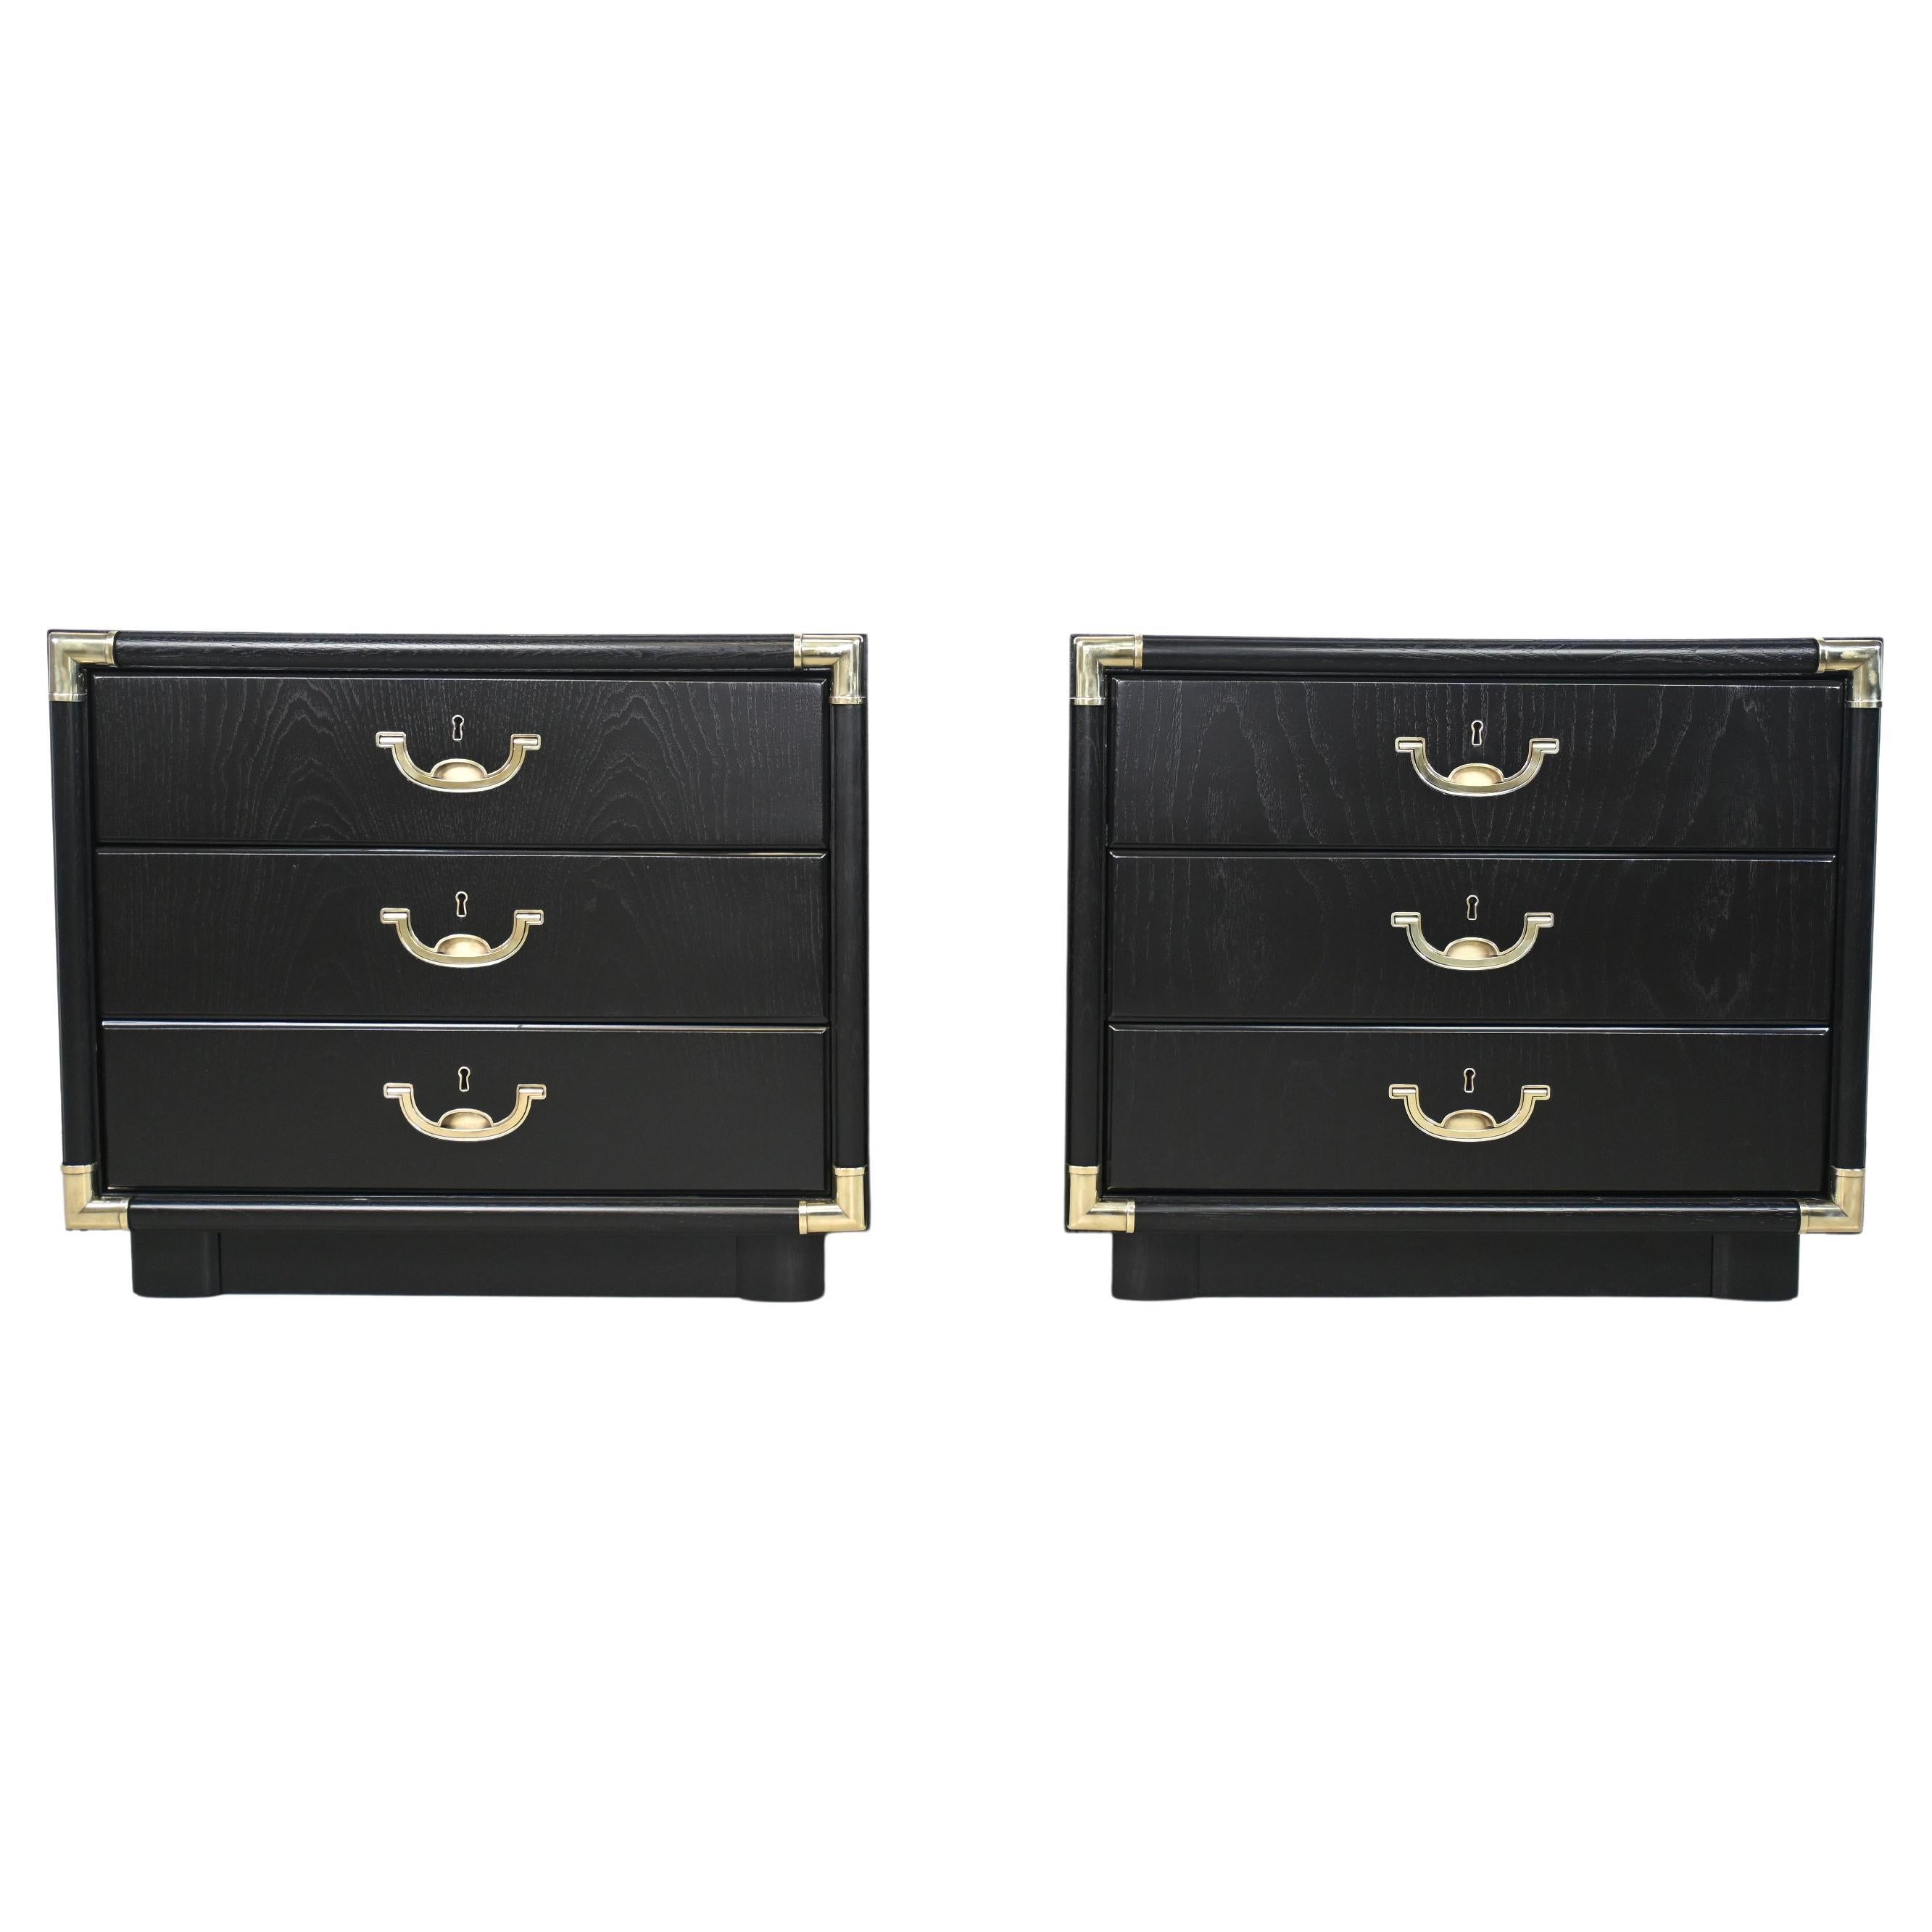 Drexel Accolade Campaign Style Black Lacquered Nightstands - a Pair